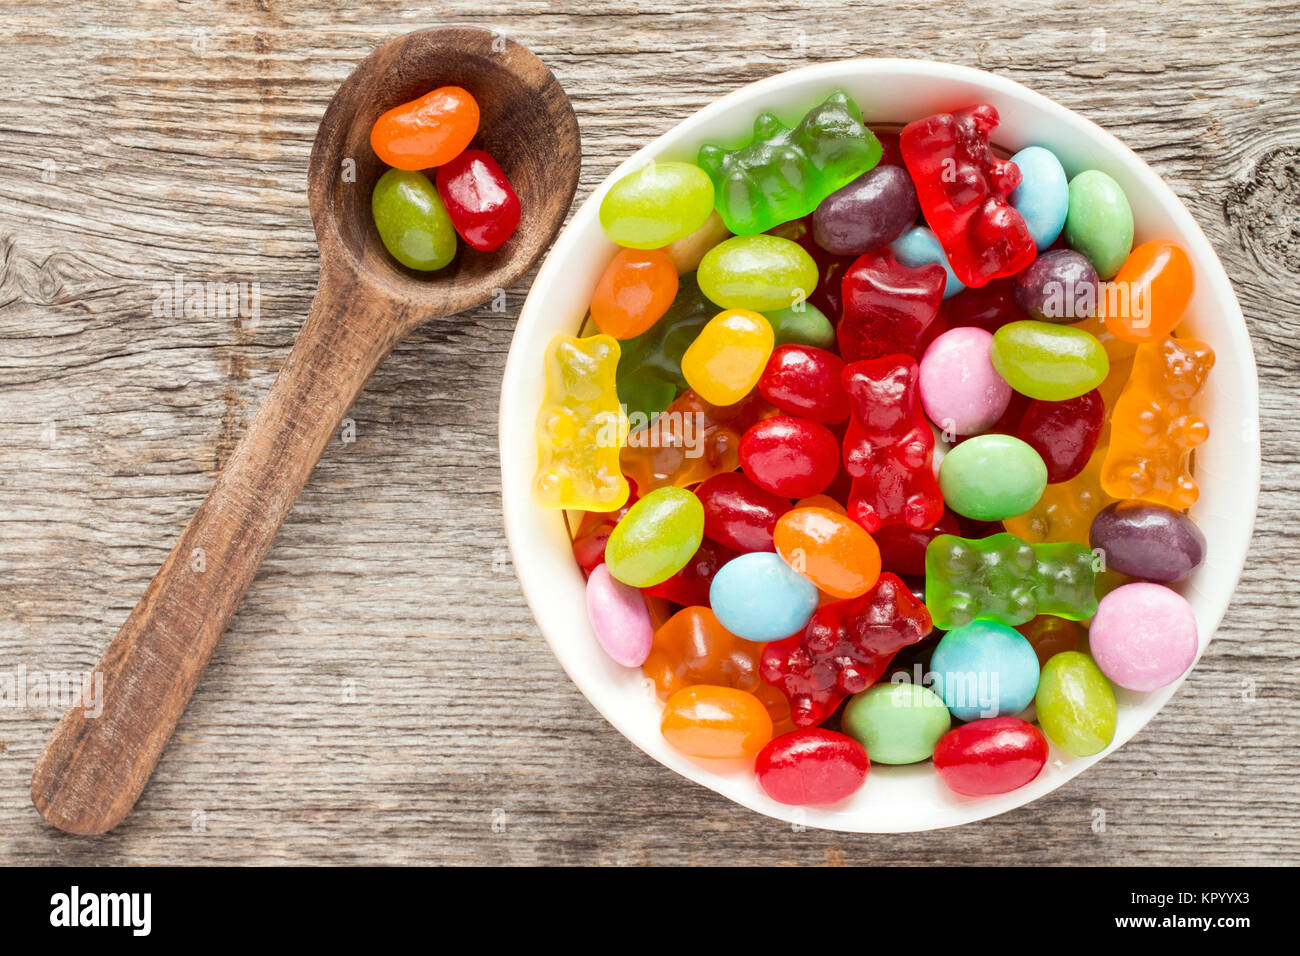 Spoon and bowl  of various candies Stock Photo